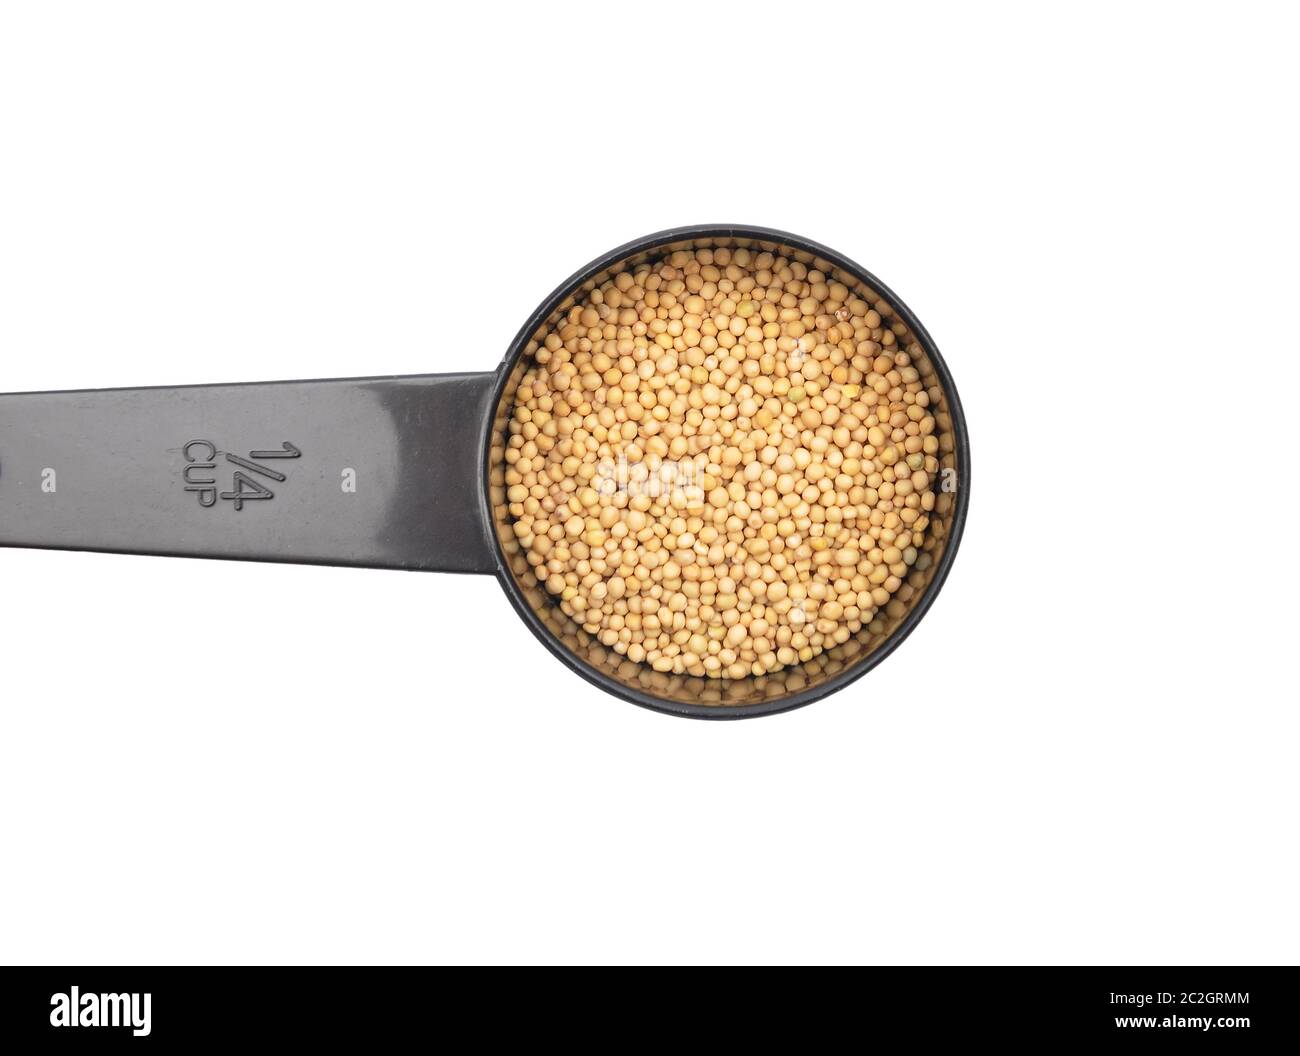 Mustard seeds in measuring spoon on white background Stock Photo